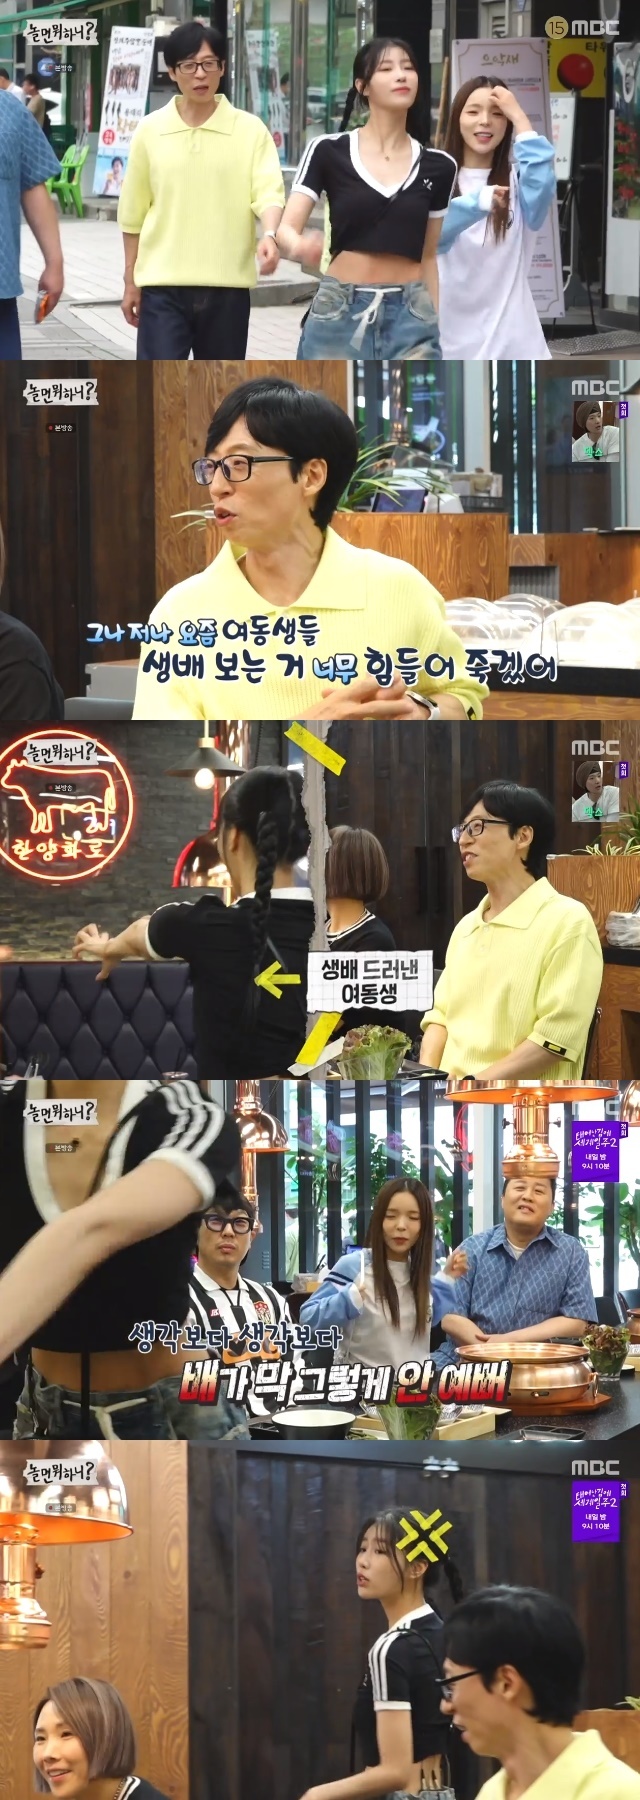 Yoo Jae-Suk complained that Lee Mi-joos costume was filled with complaints.In the 189th episode of MBCs entertainment show Hangout with Yoo (hereinafter referred to as Nol-what) broadcasted on June 10, the exposure of the ship in the Americas touched Yoo Jae-suks heart.On this day, Yoo Jae-Suk saw Lee Mi-joo, who was particularly excited during the opening, and said, I pretend to be bright, adding, I got better in Corona, stayed at home and came out today.Lee Mi-joos Cropty costume said, Im having a hard time seeing my sisters these days. Why are you showing your life? So is Min-yi and Ji-hyo.At this time, Lee Yi-kyung added, Its not as beautiful as I thought, and Lee Mi-joo said, Its a personal attack.The members laughed at Lee Yi-kyung, Lee Mi-joos public date last week, referring to Lee Yi-kyung, Lee Yi-kyung, Lee Yi-kyung, Lee Yi-kyung,